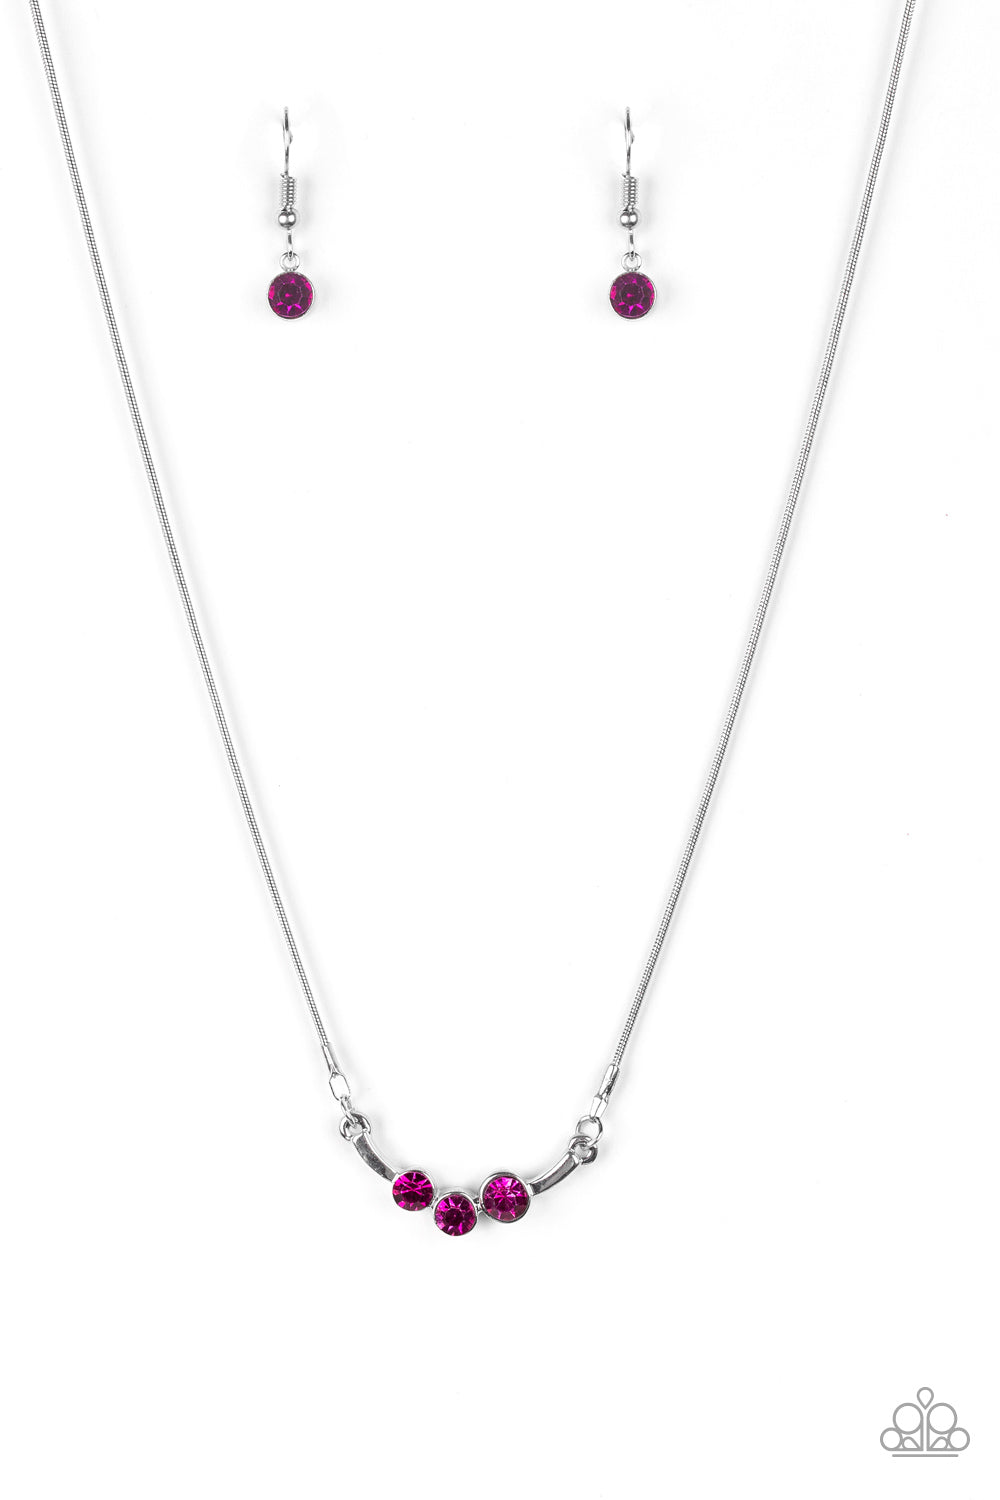 A trio of glittery pink rhinestones as Sparkling Stargazer Pink Necklace Paparazzi Accessories